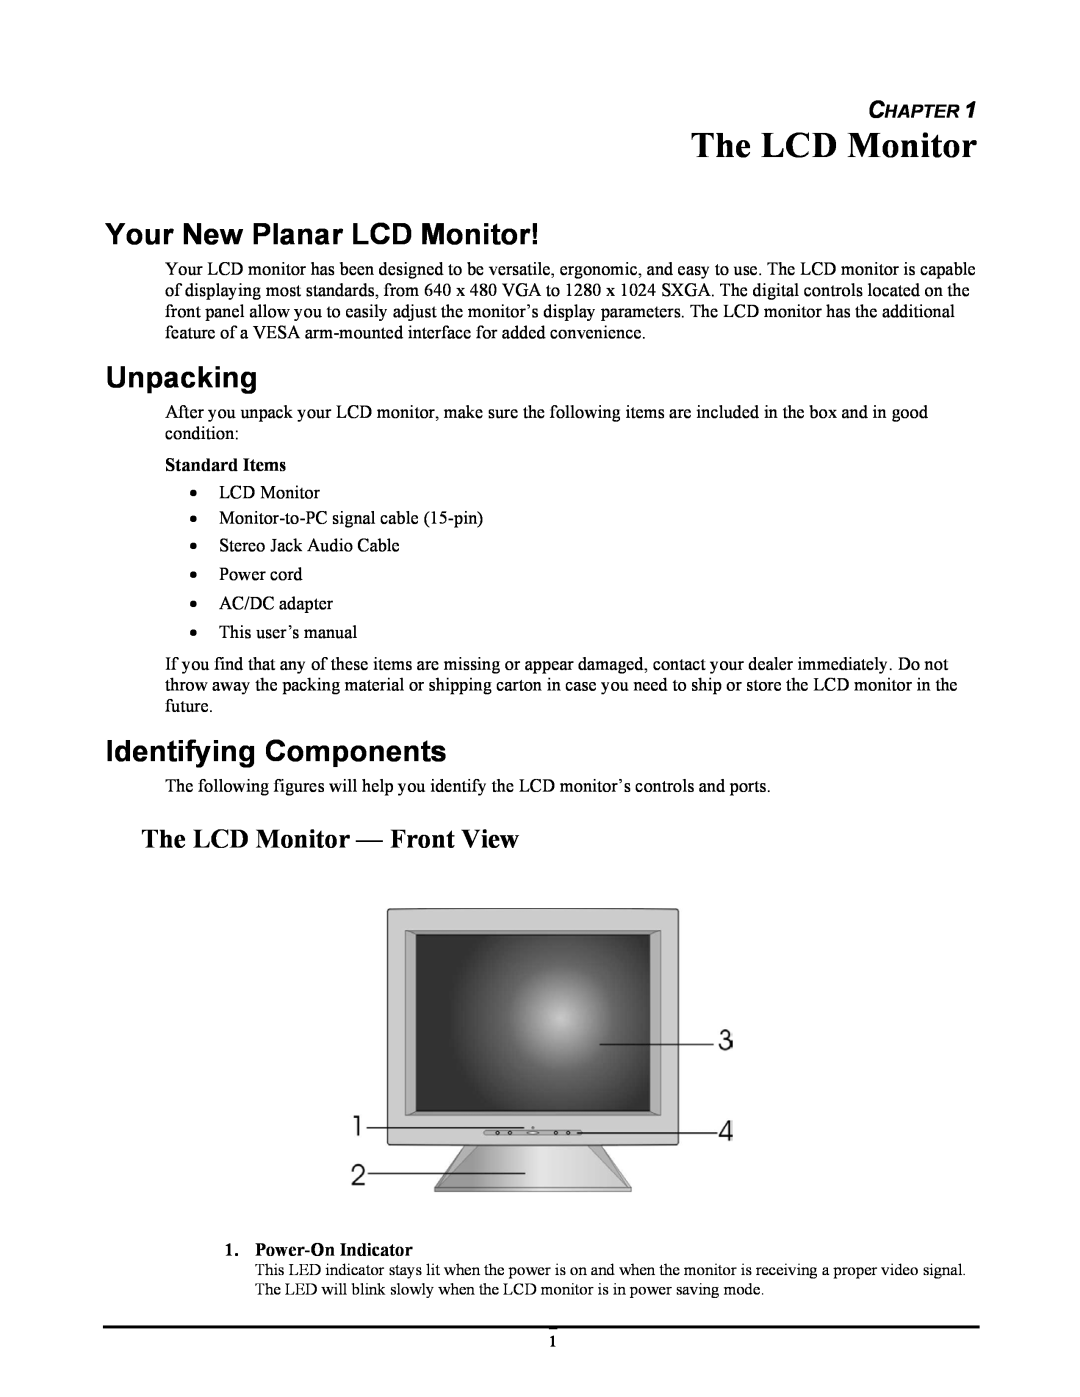 Planar FWT1744NU The LCD Monitor, Your New Planar LCD Monitor, Unpacking, Identifying Components, Chapter, Standard Items 